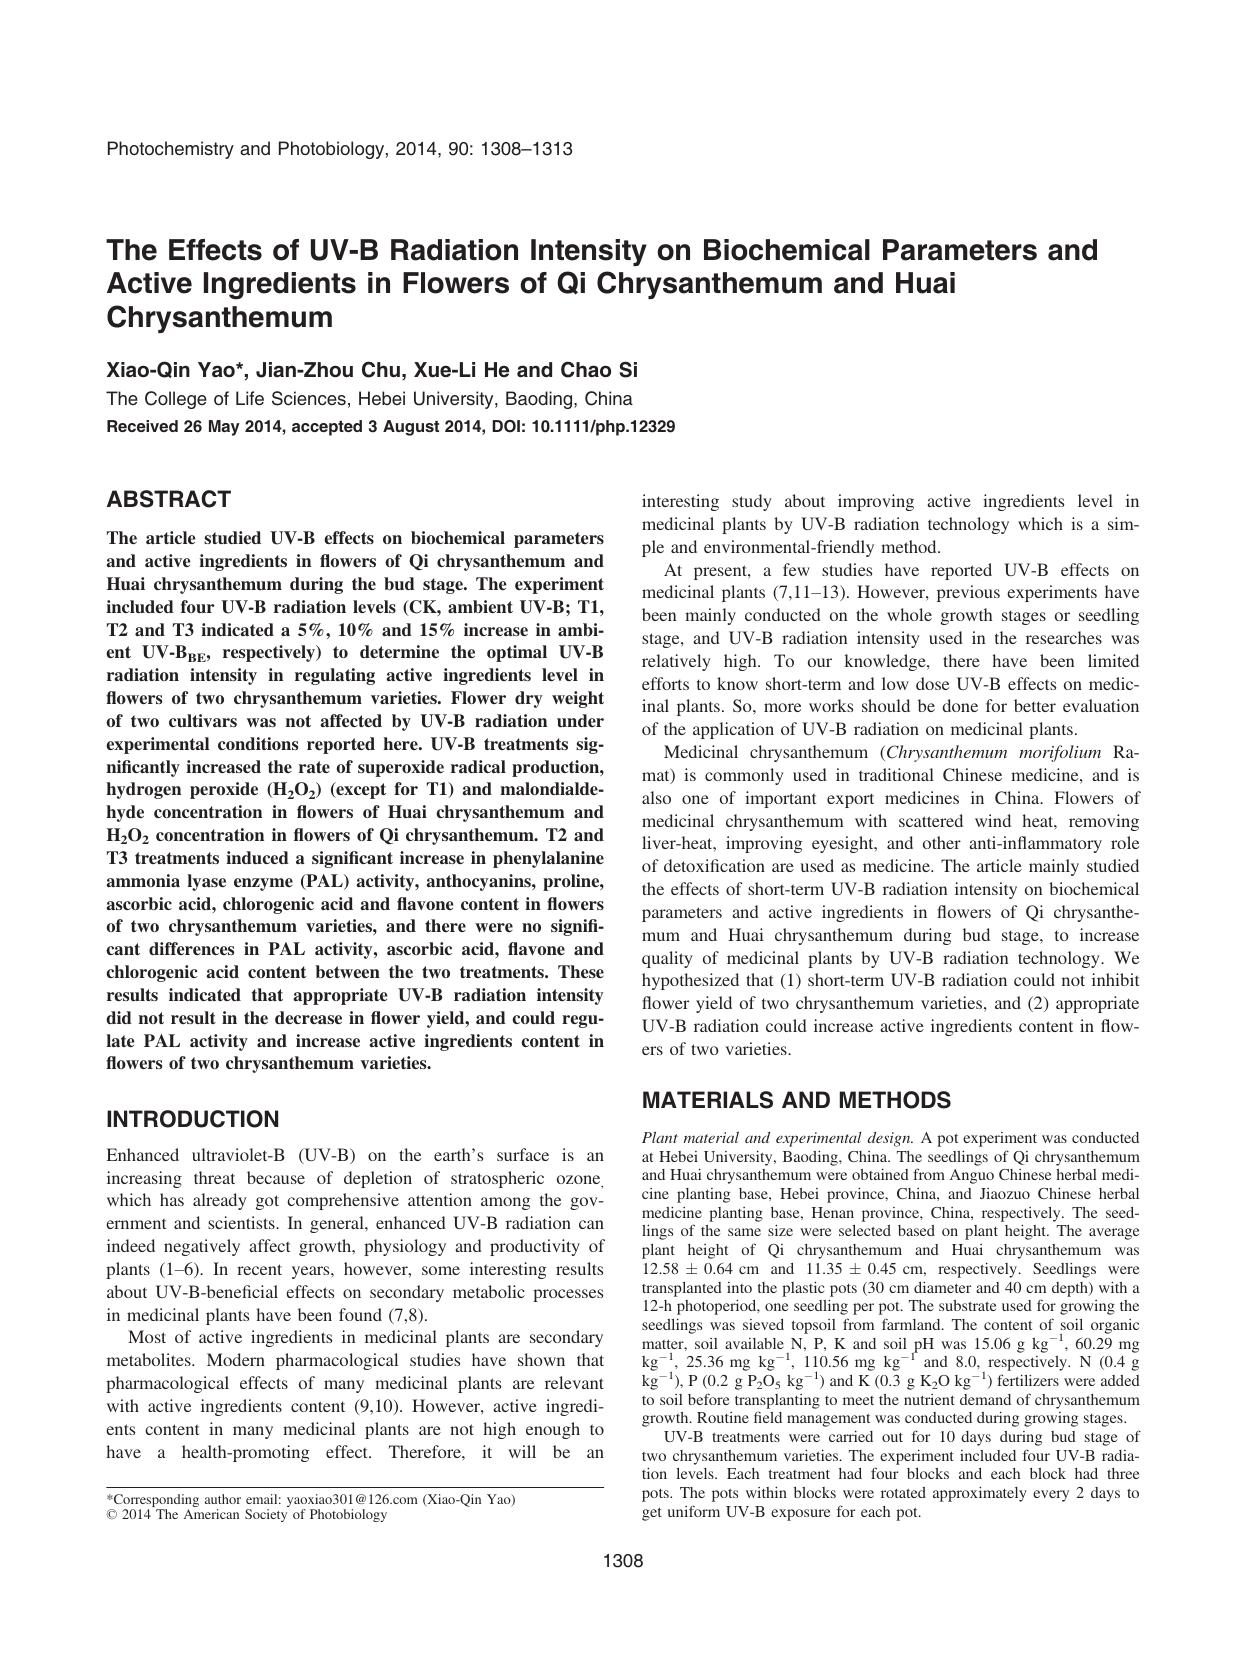 The Effects of UVB Radiation Intensity on Biochemical Parameters and Active Ingredients in Flowers of Qi Chrysanthemum and Huai Chrysanthemum by Unknown